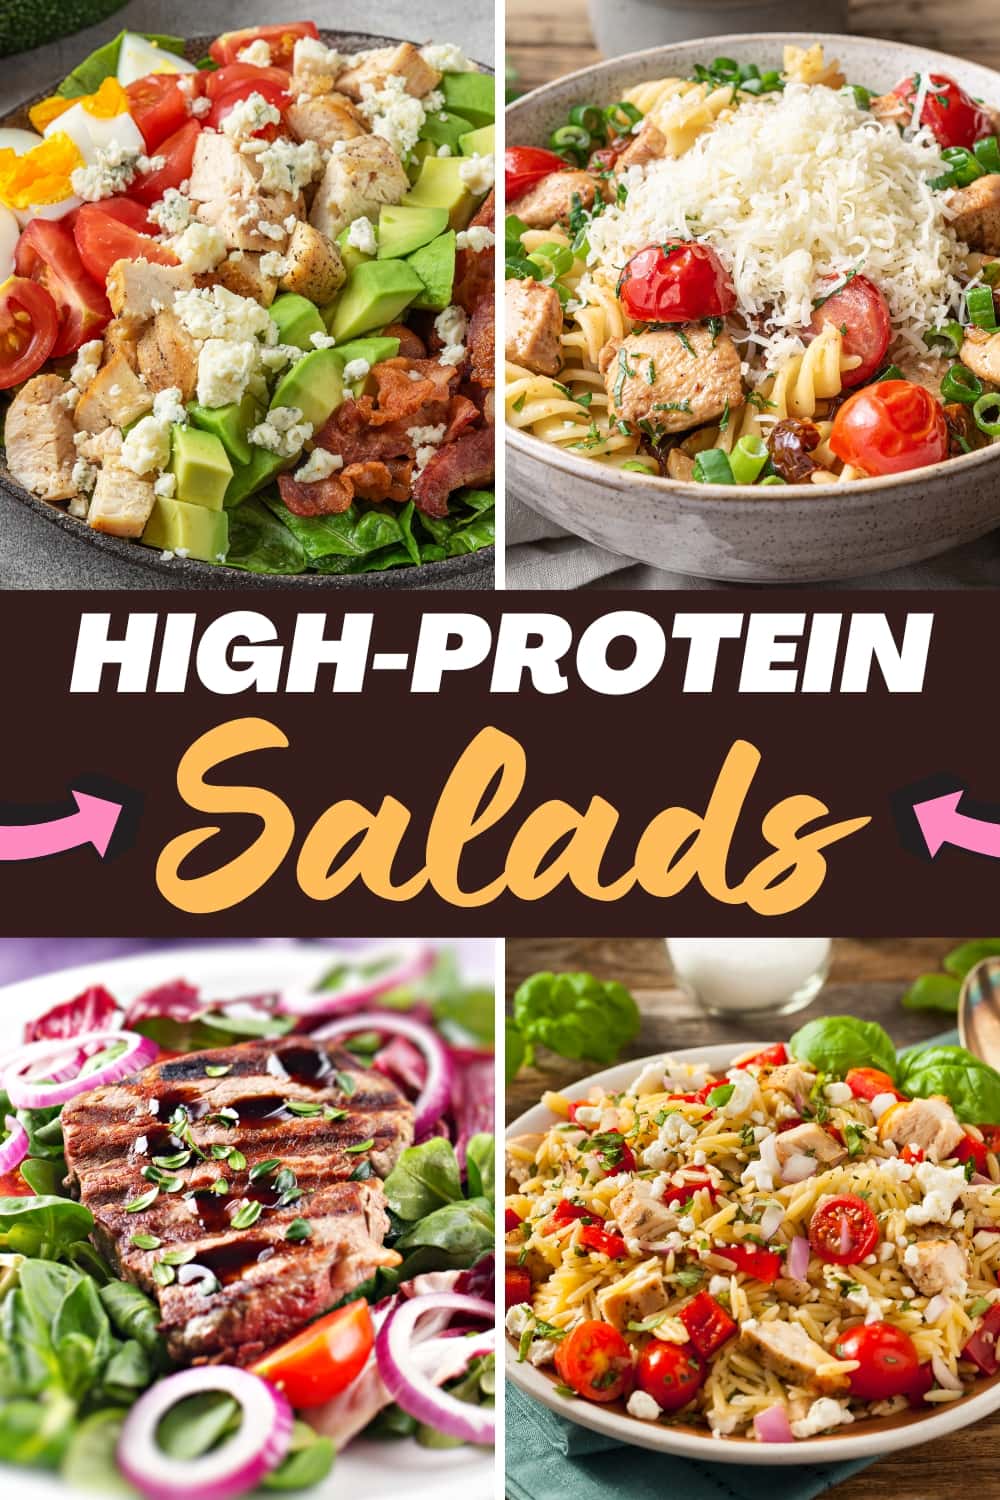 25 Easy High-Protein Salads (Healthy Recipes) -Insanely Good